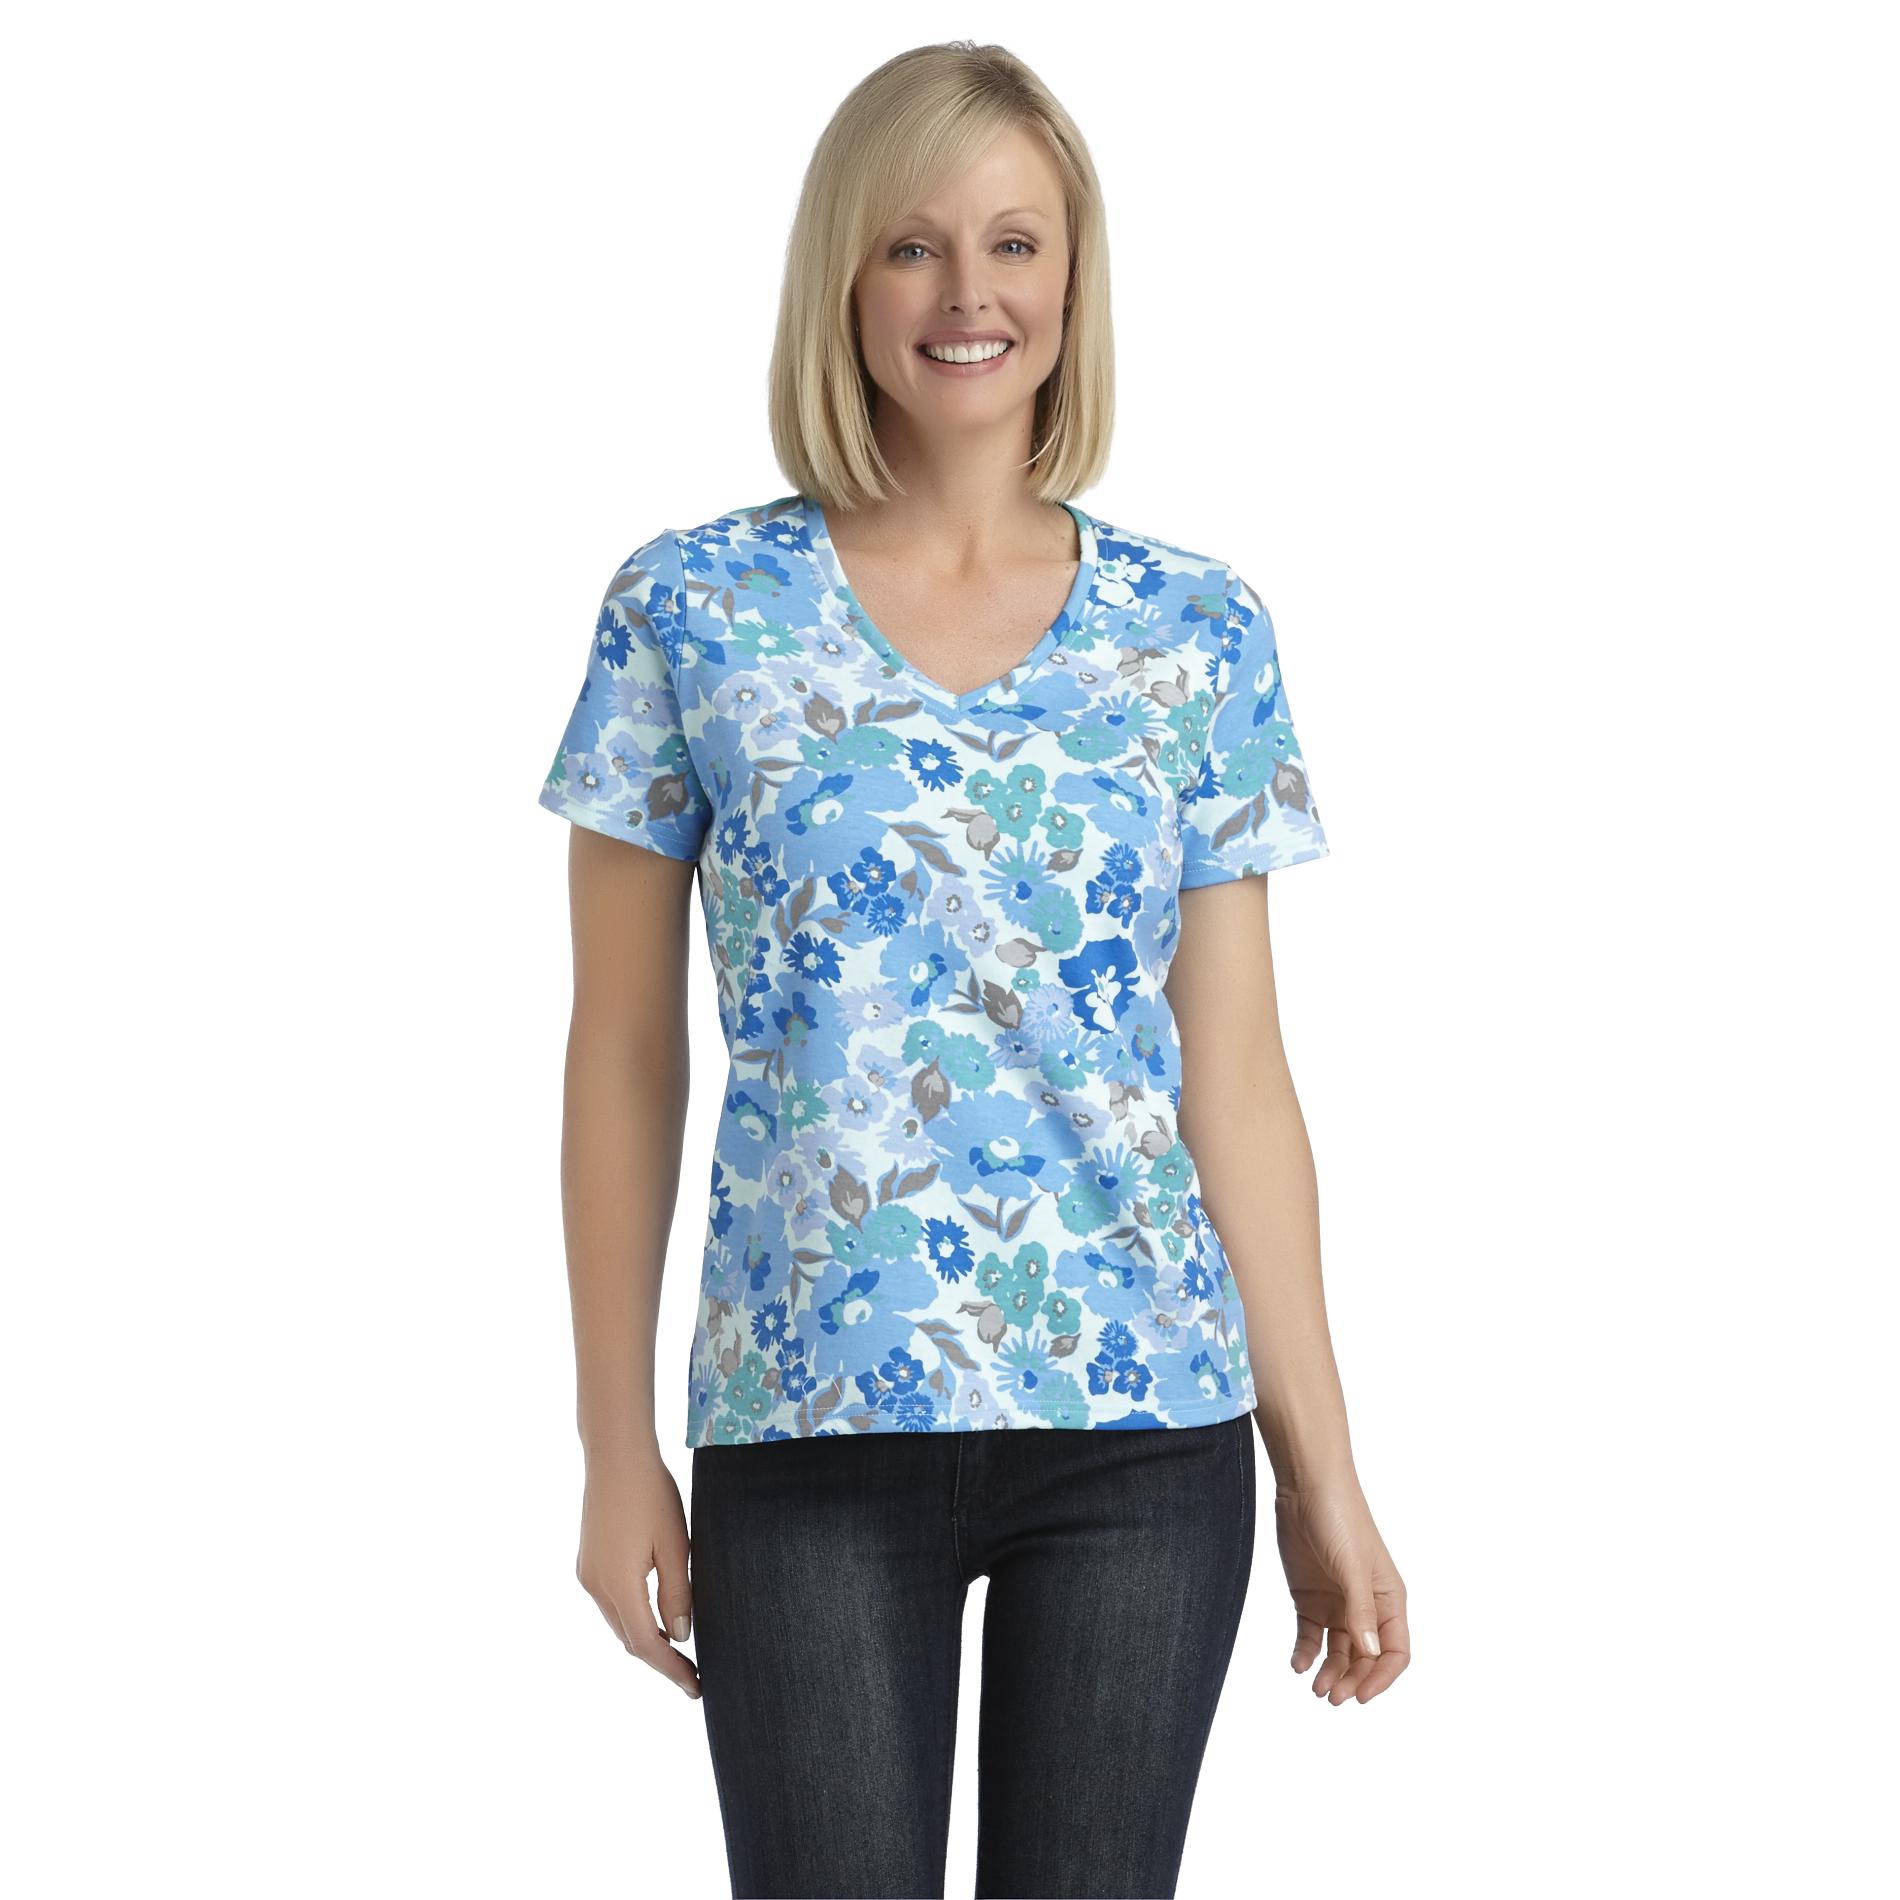 Basic Editions Women's Relaxed Fit T-Shirt - Floral